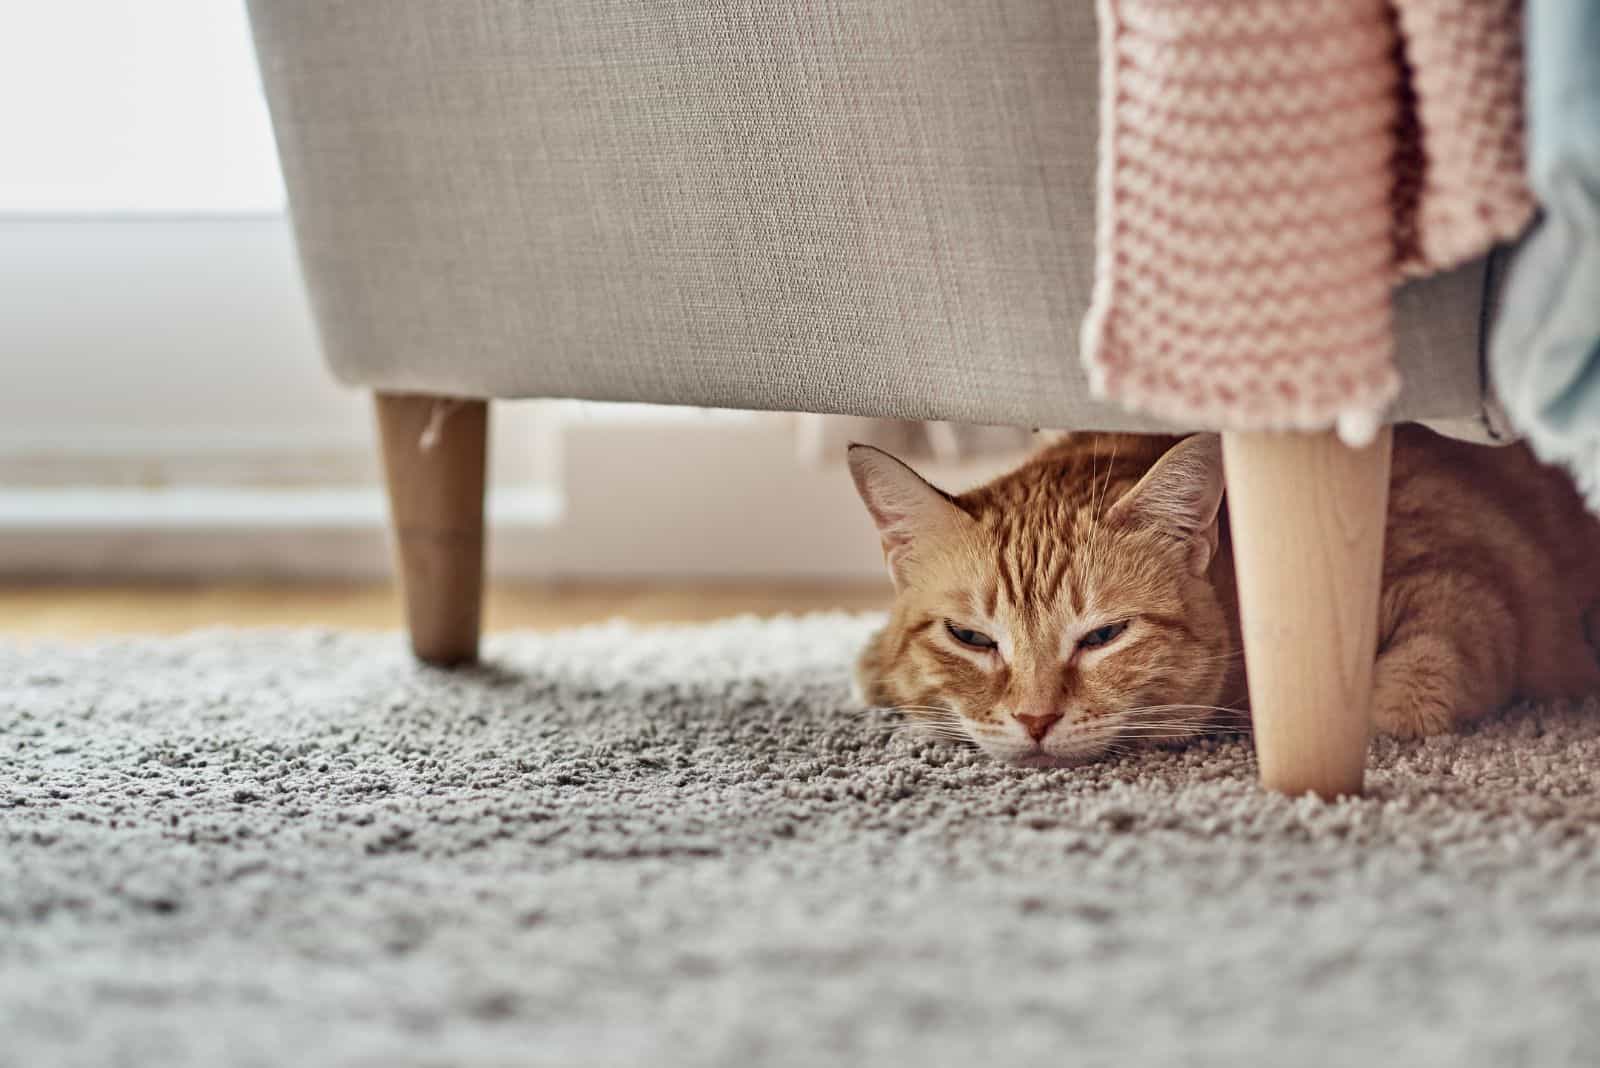 the cat is lying under the chair